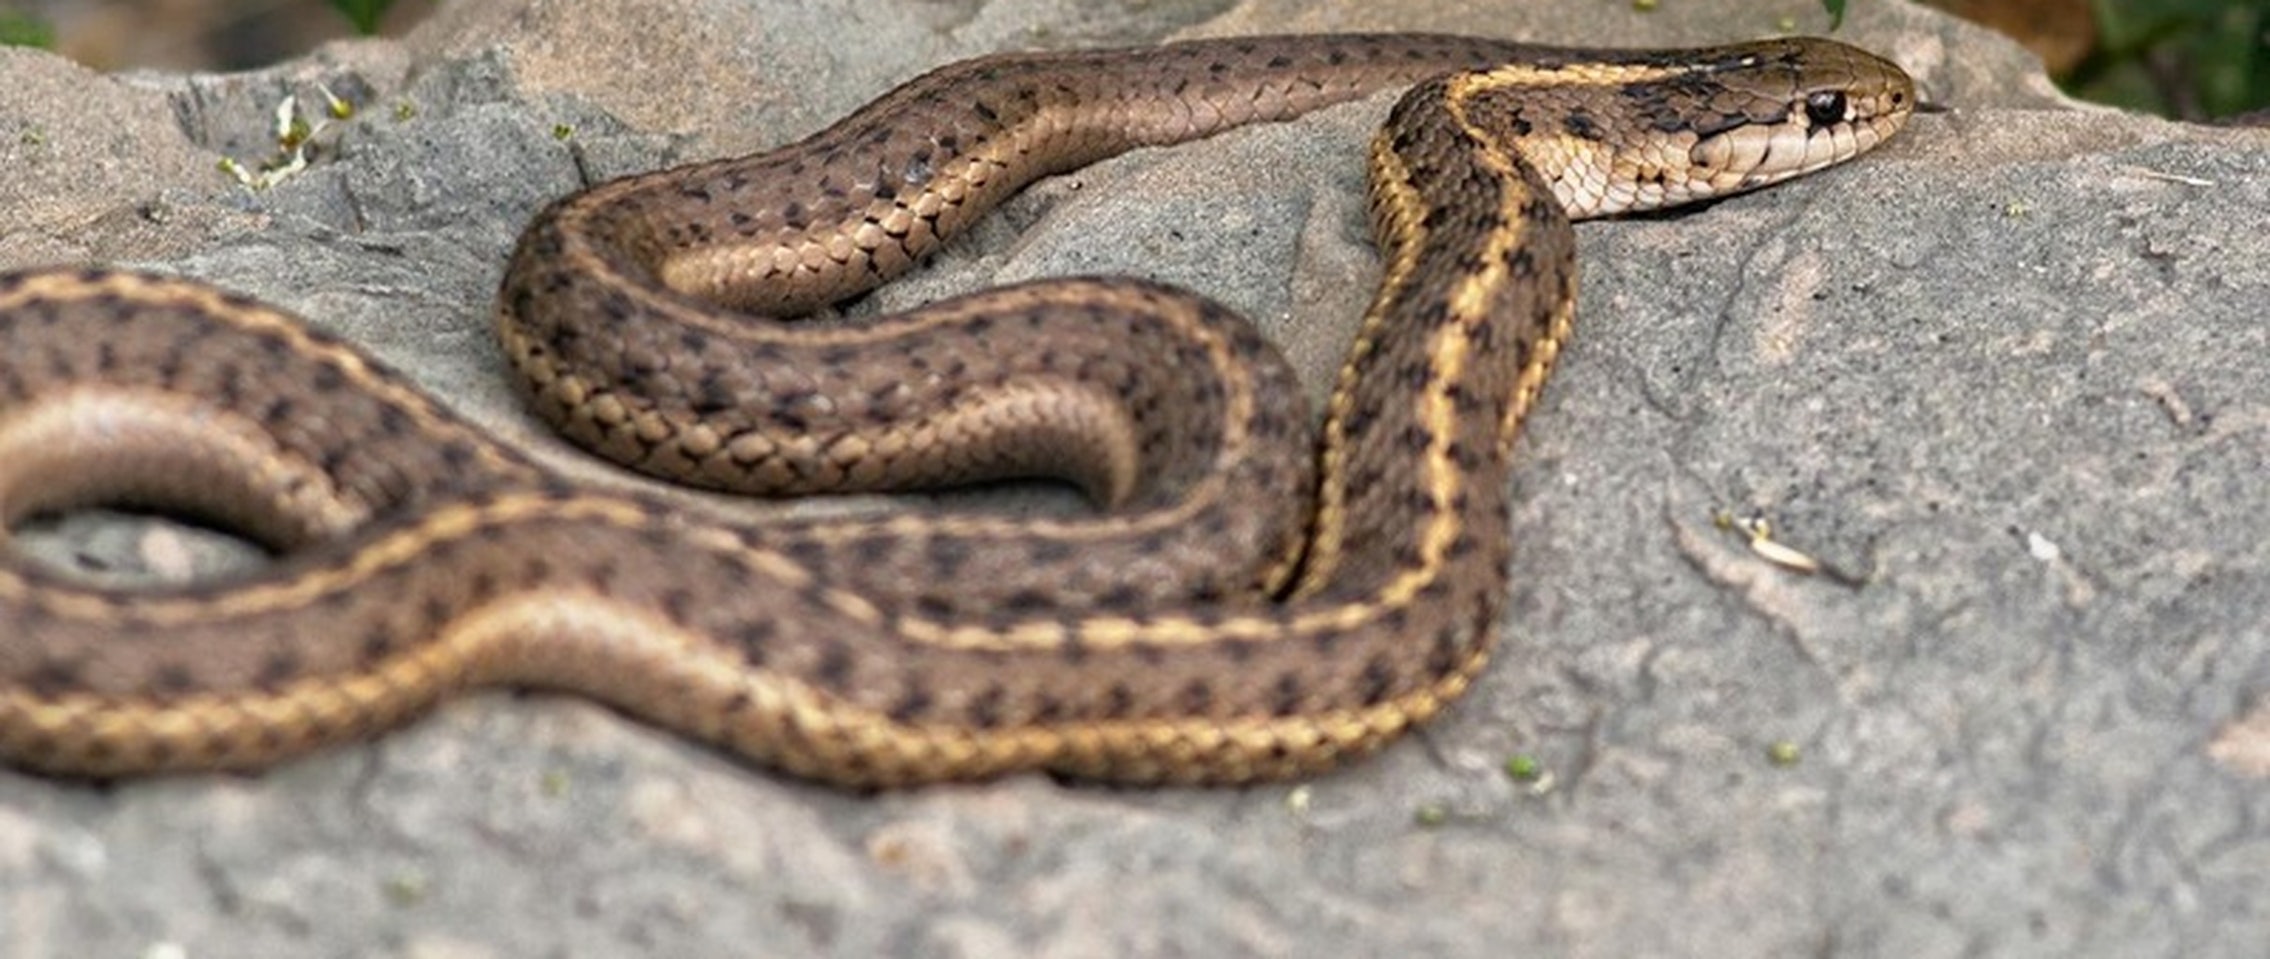 The Internet is obsessed with a video of a man having sex with a snake